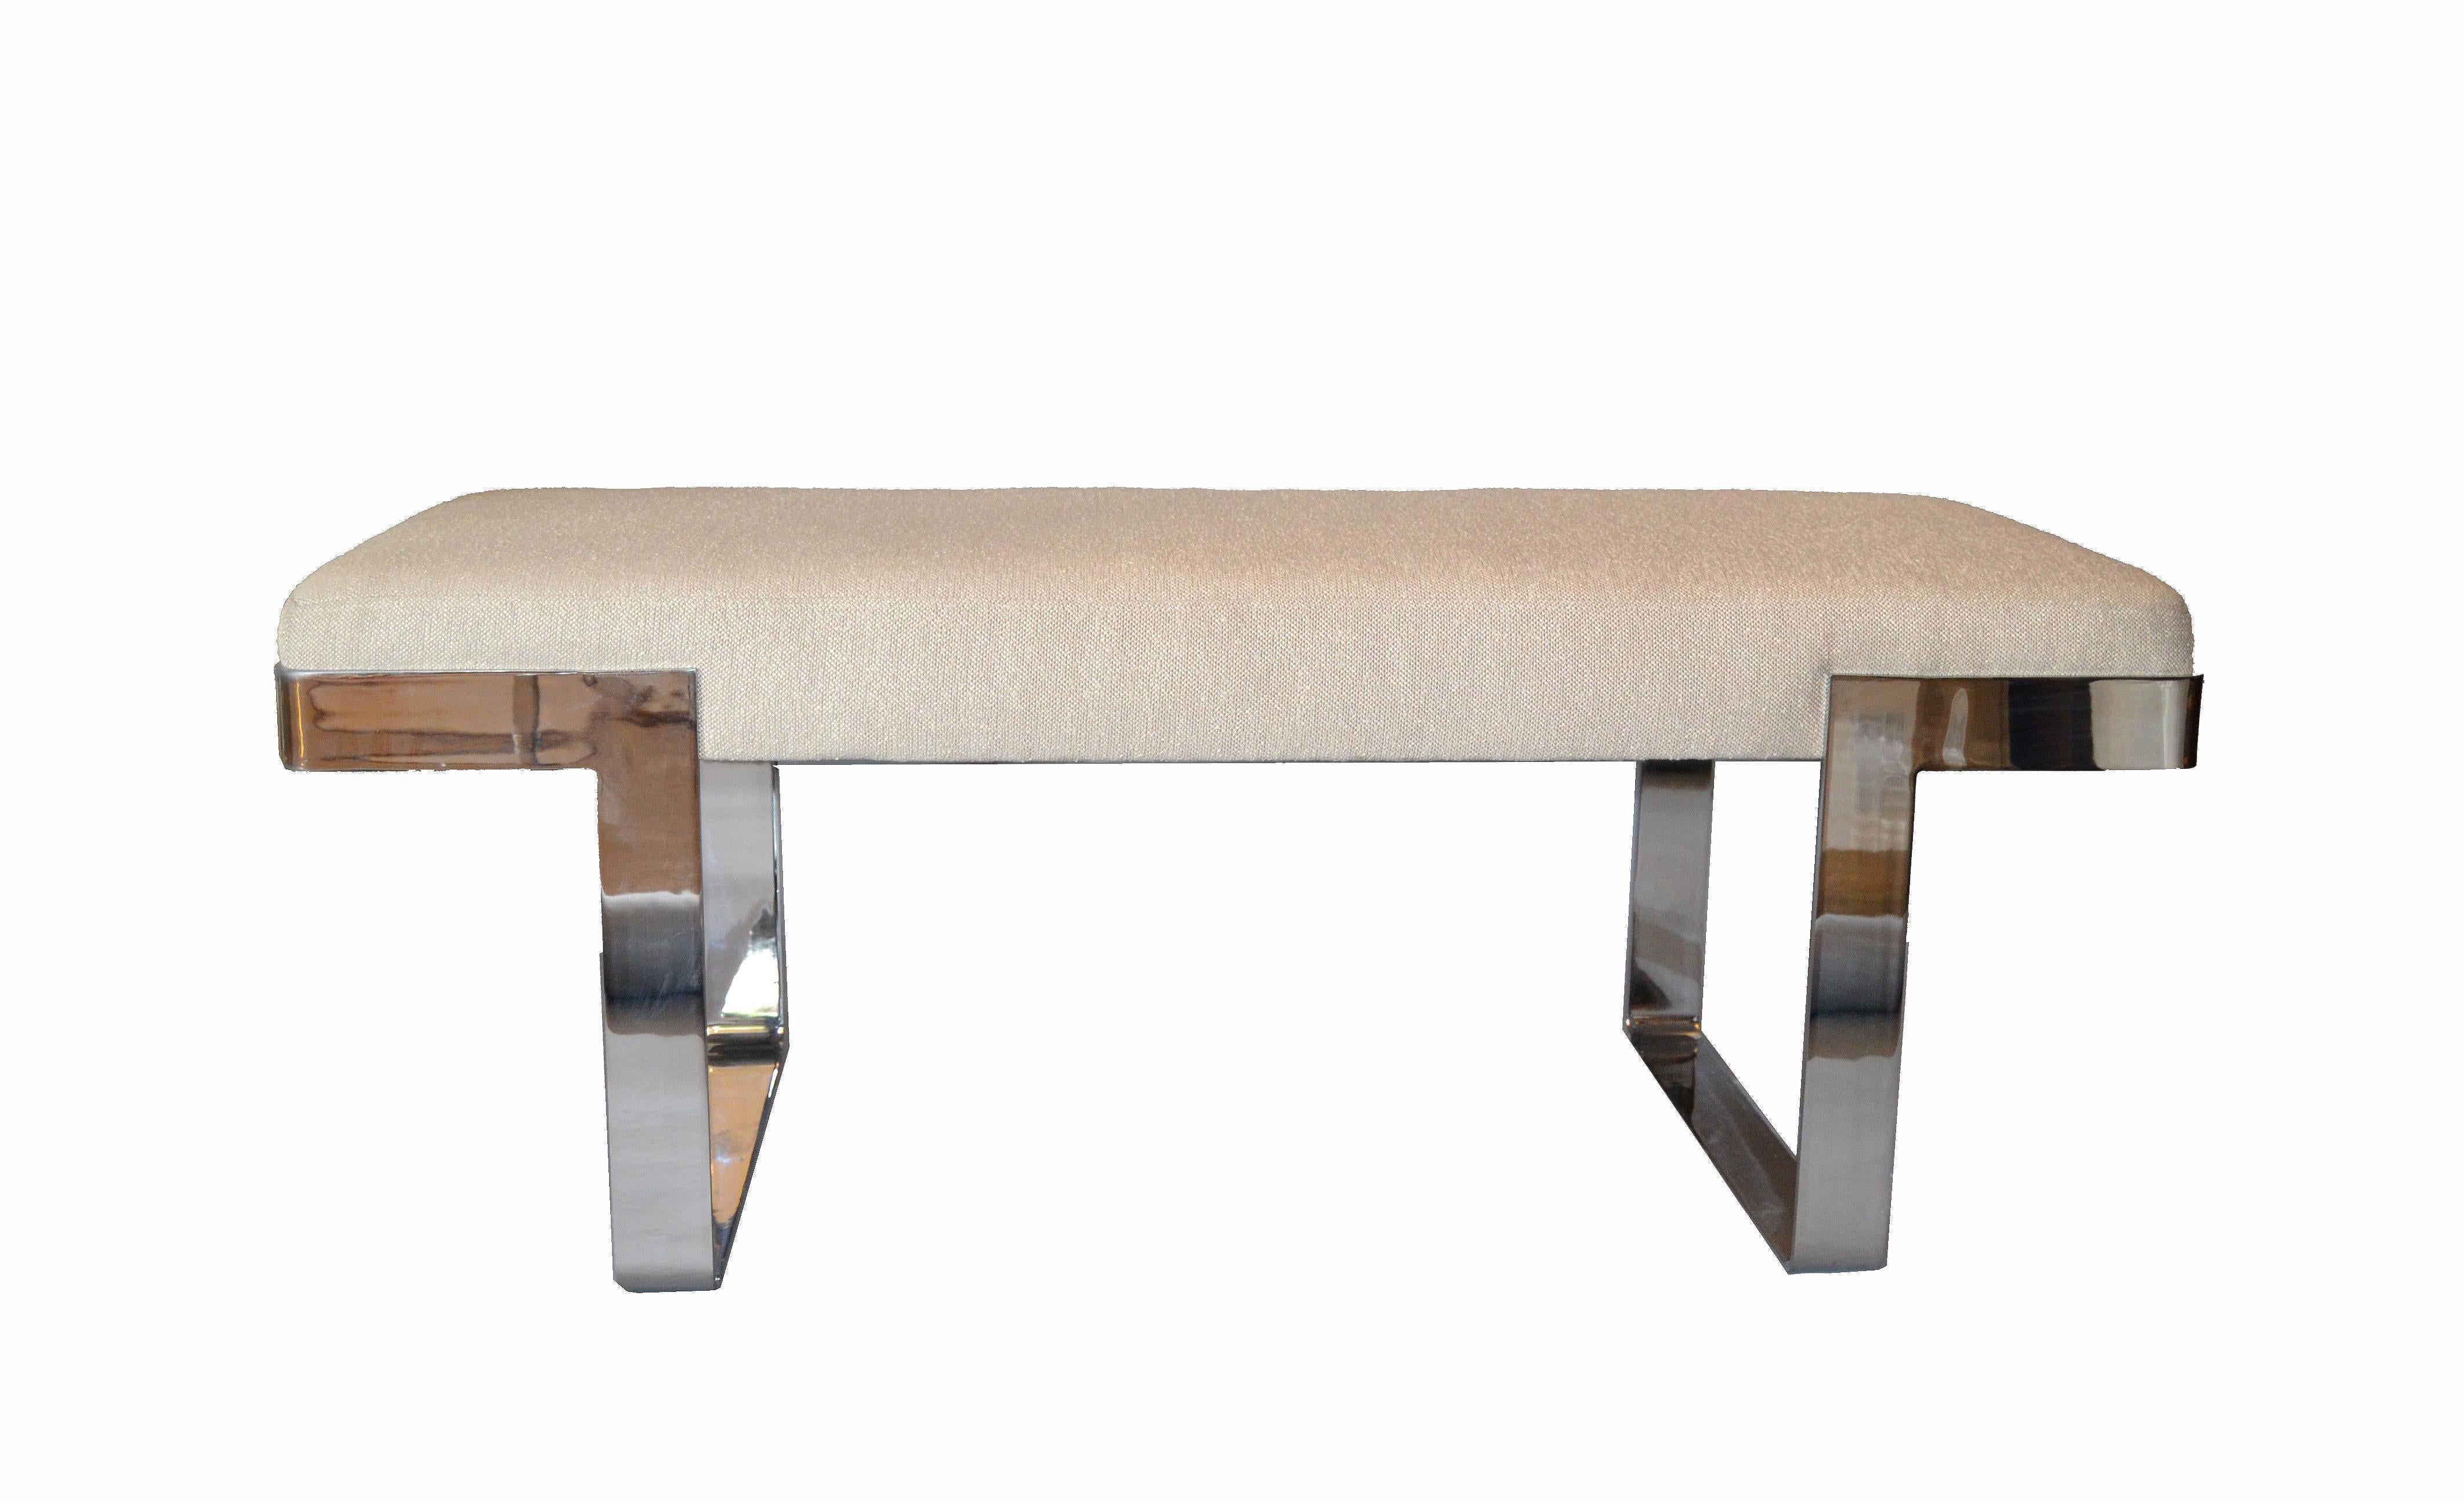 Classic Milo Baughman bench from the Pace Collection.
The base is made out of flat steel bar legs and was recently re-chromed.
Newly upholstered in beige linen and silk fabric.
We have two available.
Each bench is ready for a new home.
 